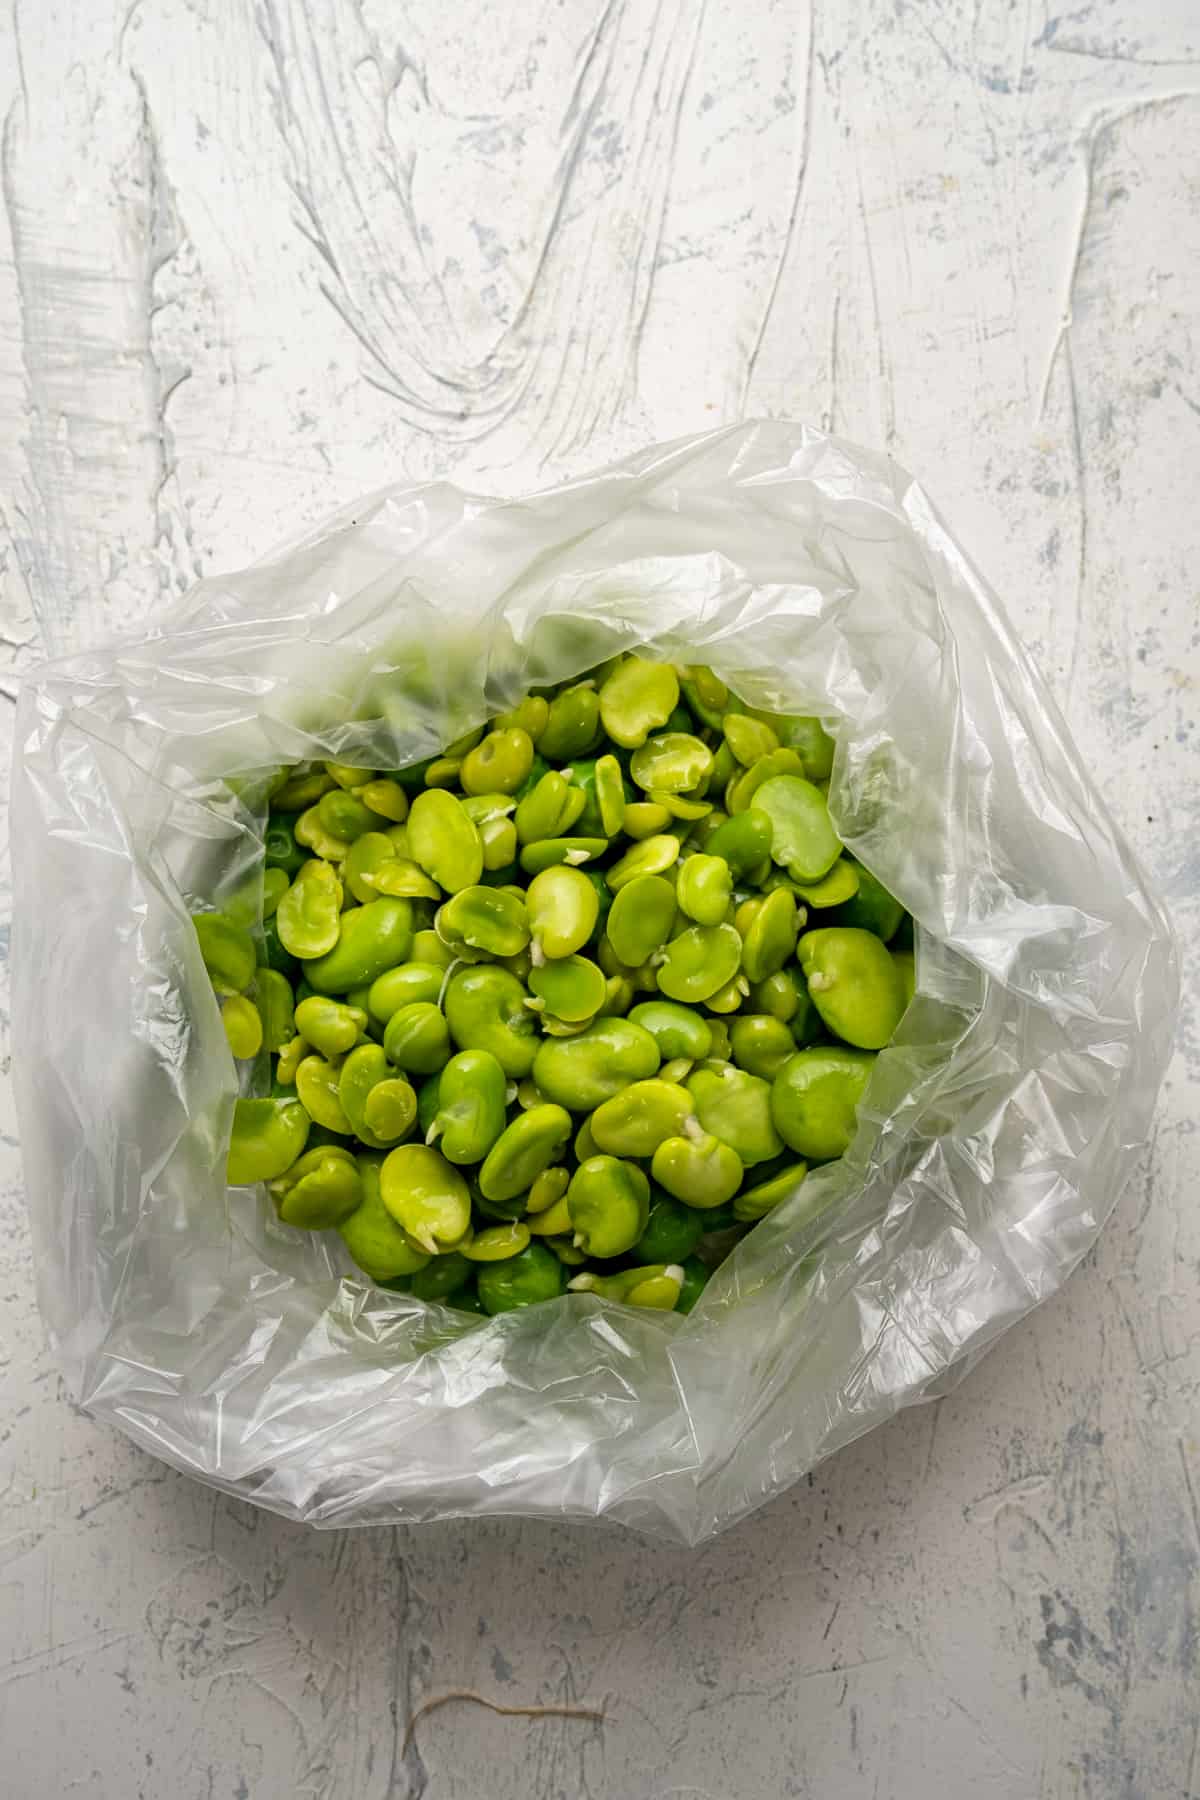 Blanched fresh fava beans in a freezer bag.